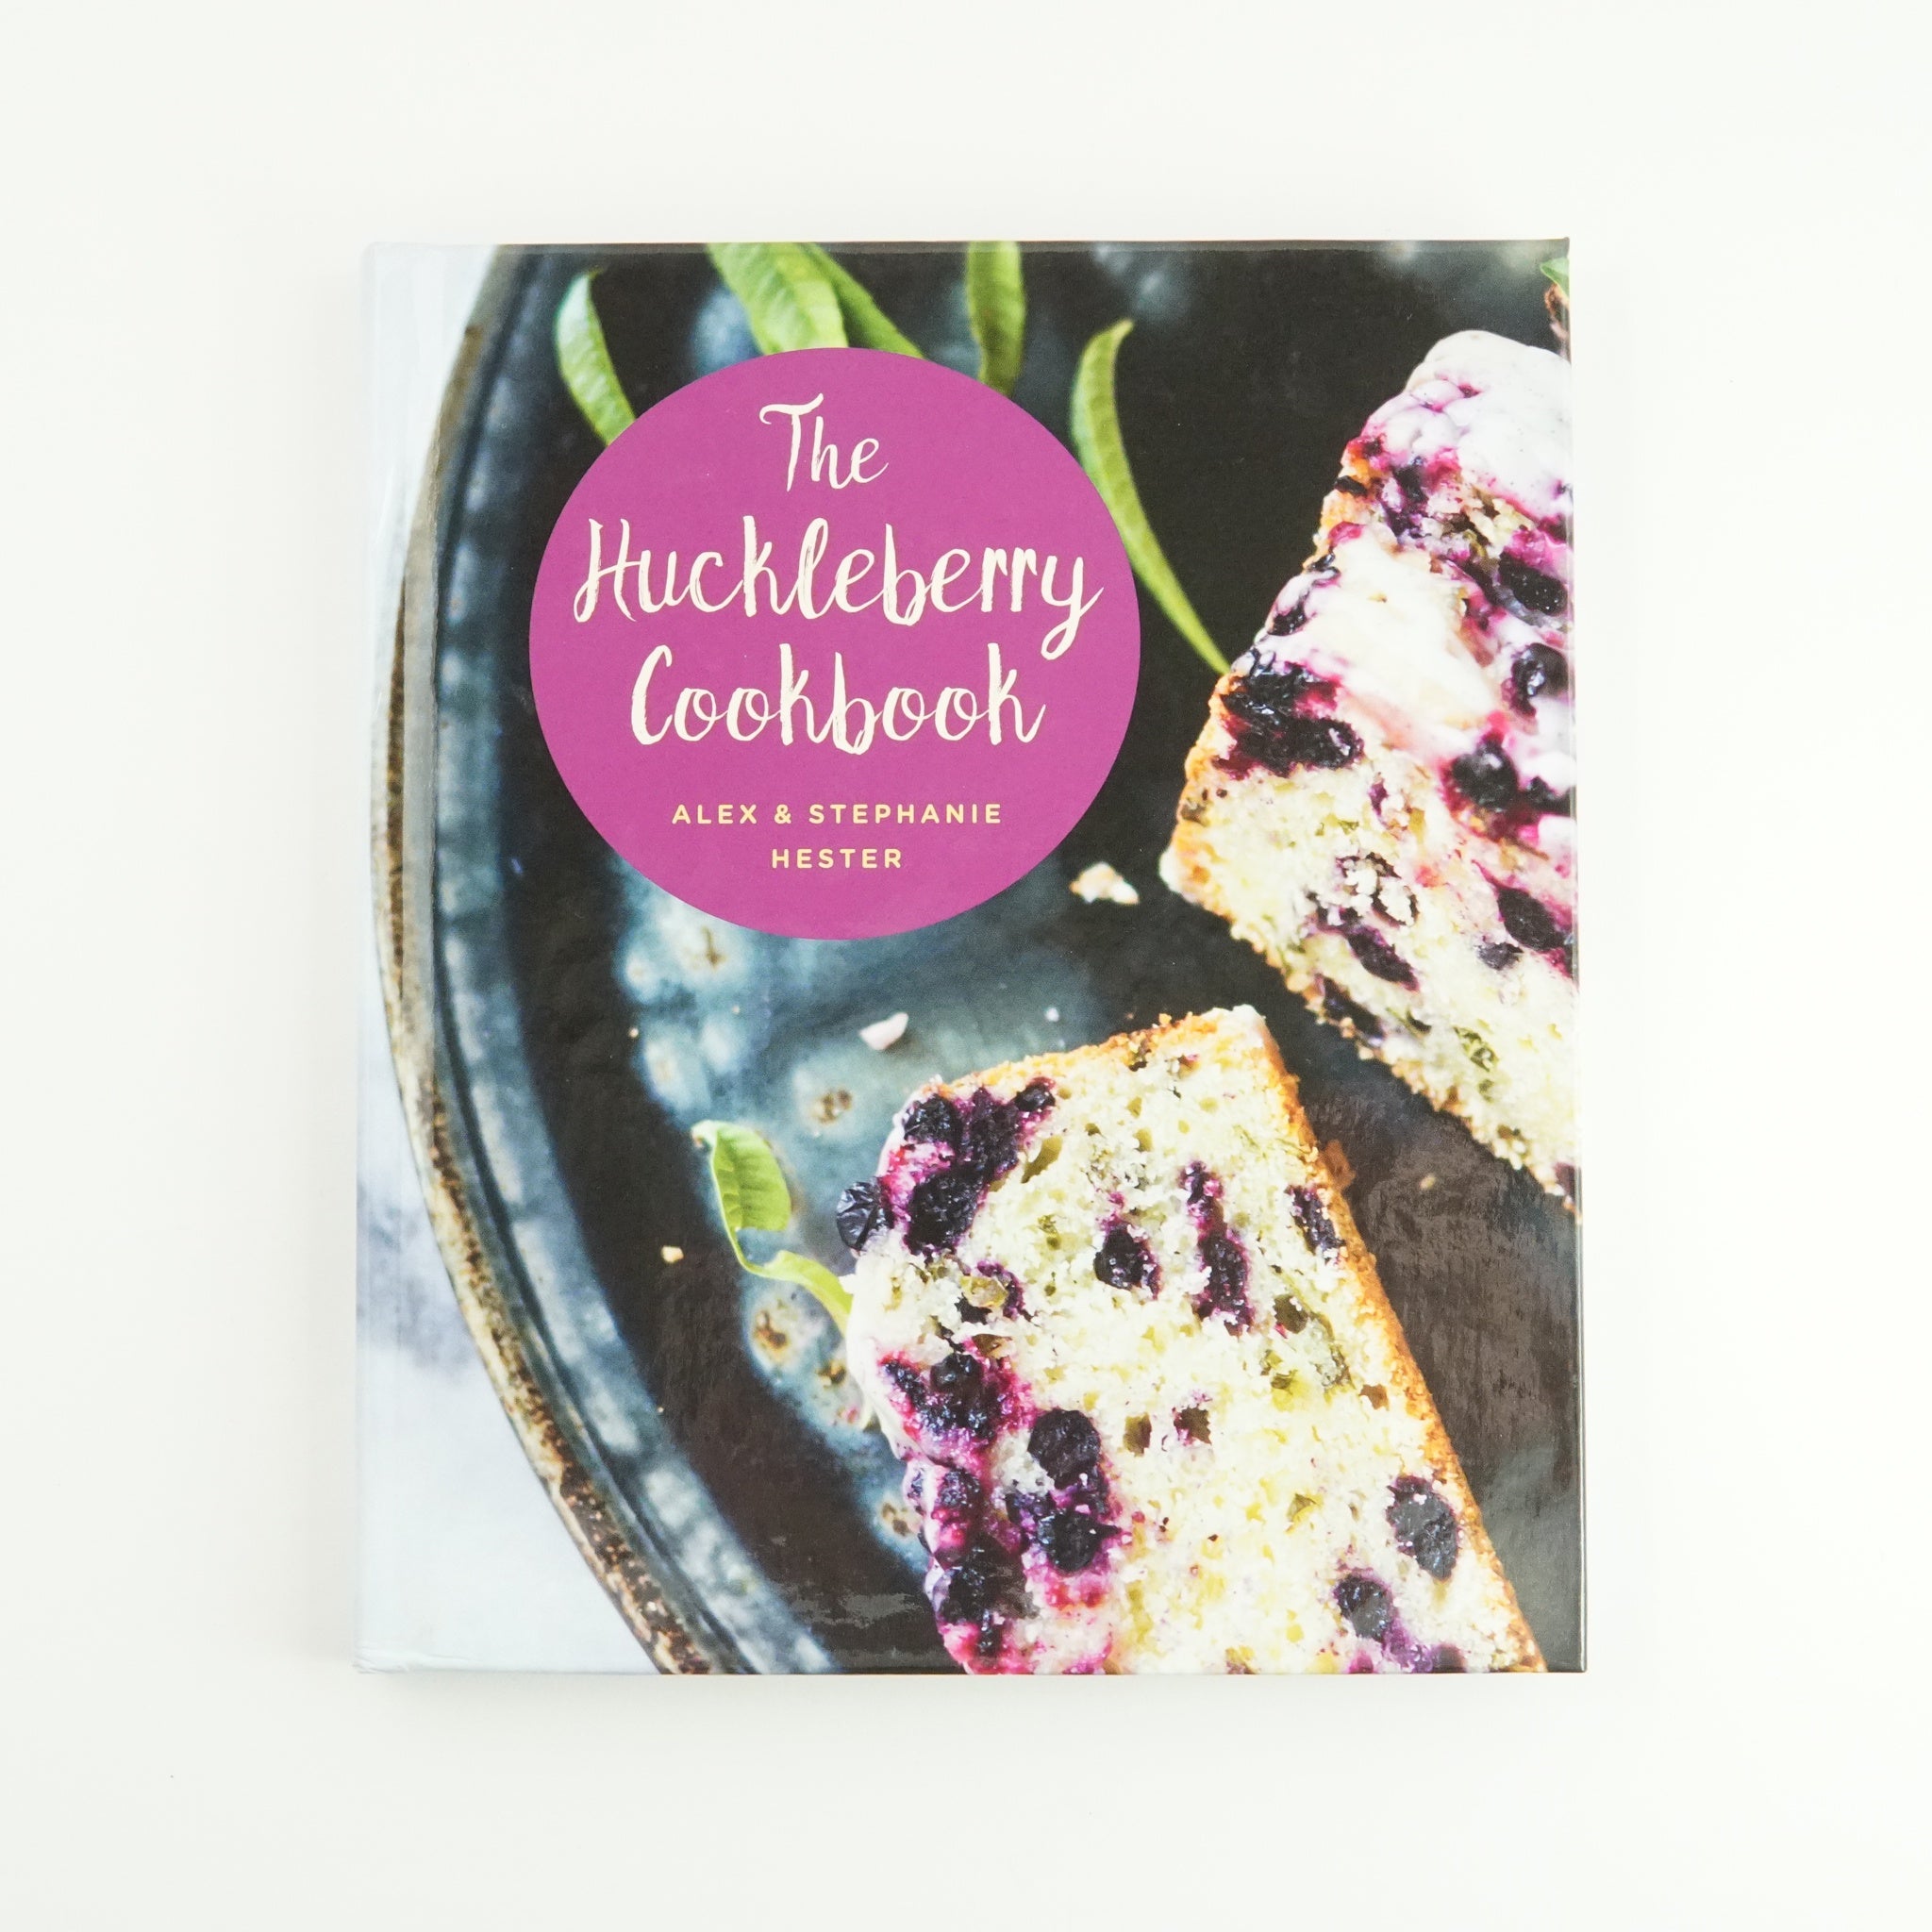 BKCK 15 THE HUCKLEBERRY COOKBOOK BY ALEX HESTER, STEPHANIE HESTER #21045873 D2 DEC23